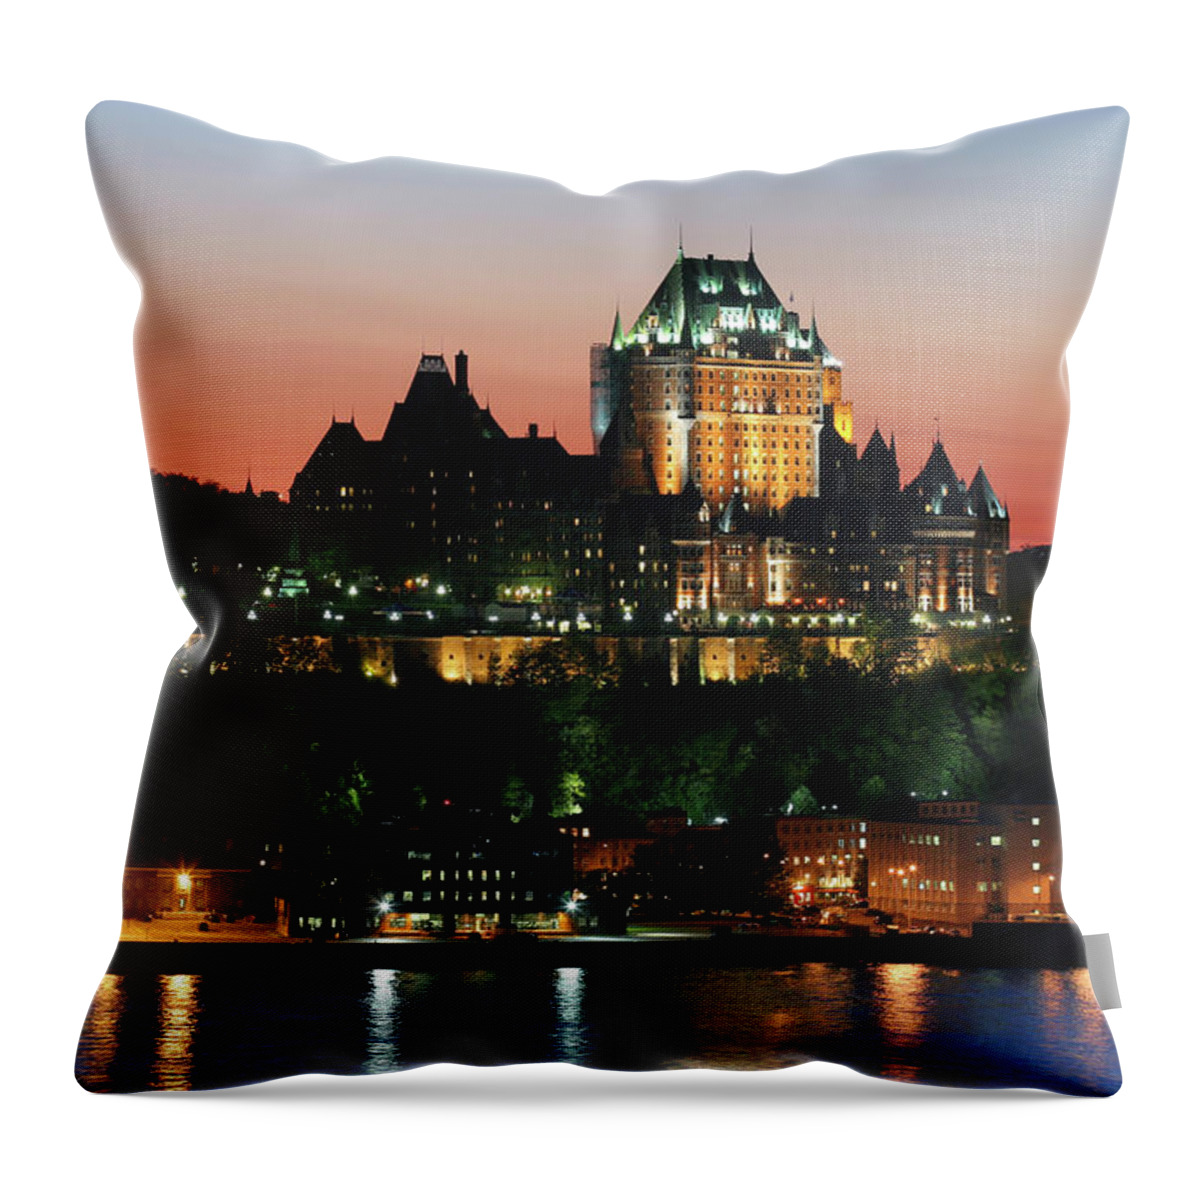 Water's Edge Throw Pillow featuring the photograph Chateau Frontenac In Old Quebec City At by Buzbuzzer